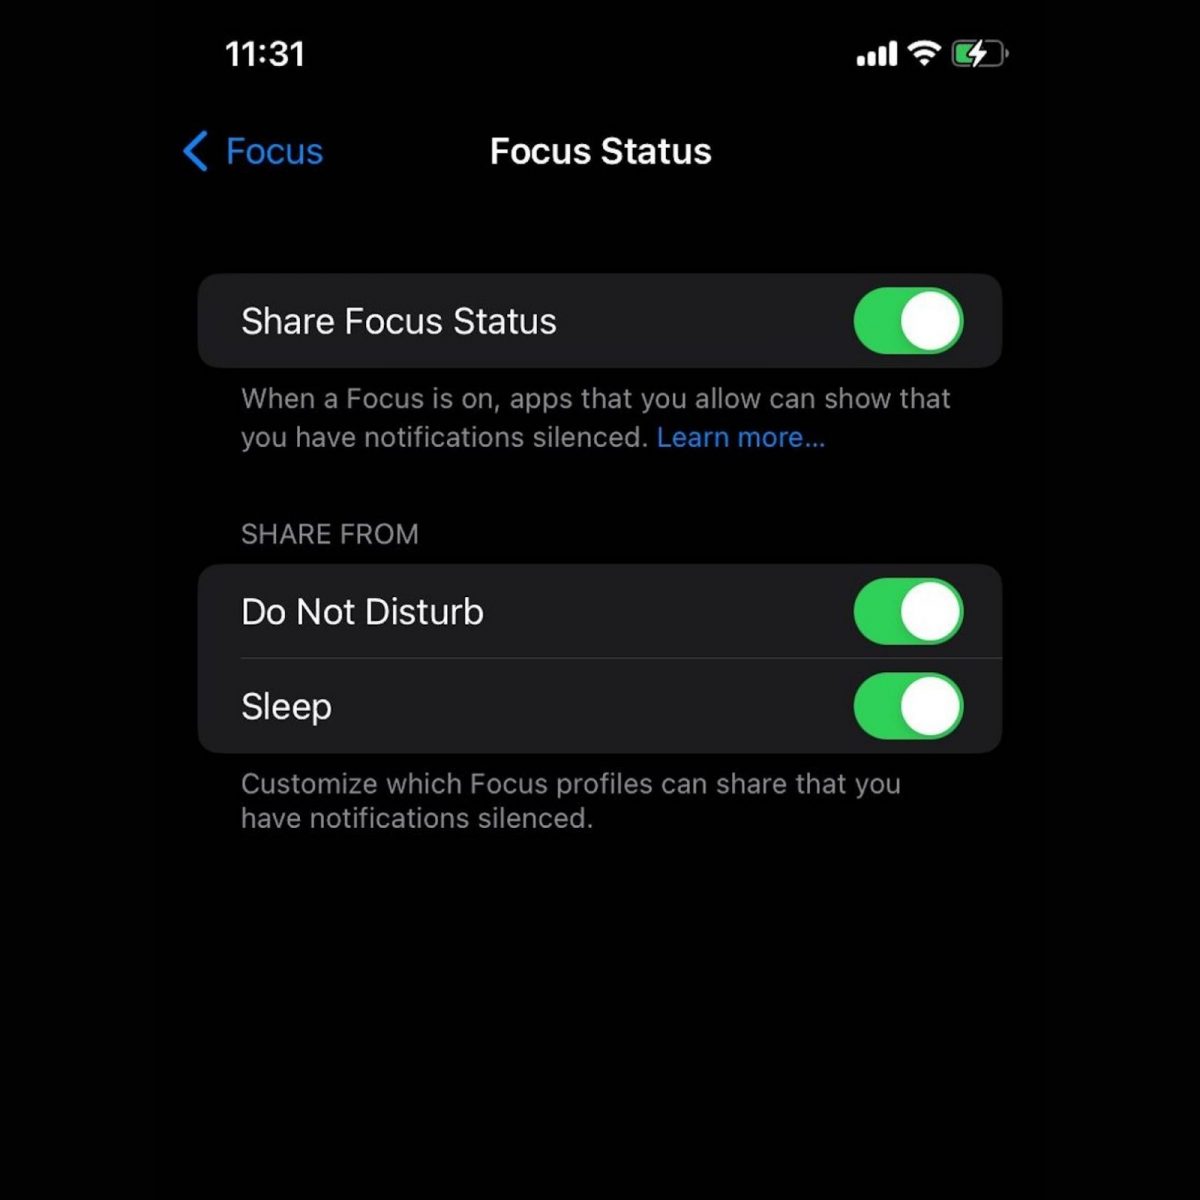 If you have ever wondered what "Share Focus Status" is within the Focus settings, we explained it to you in this article!